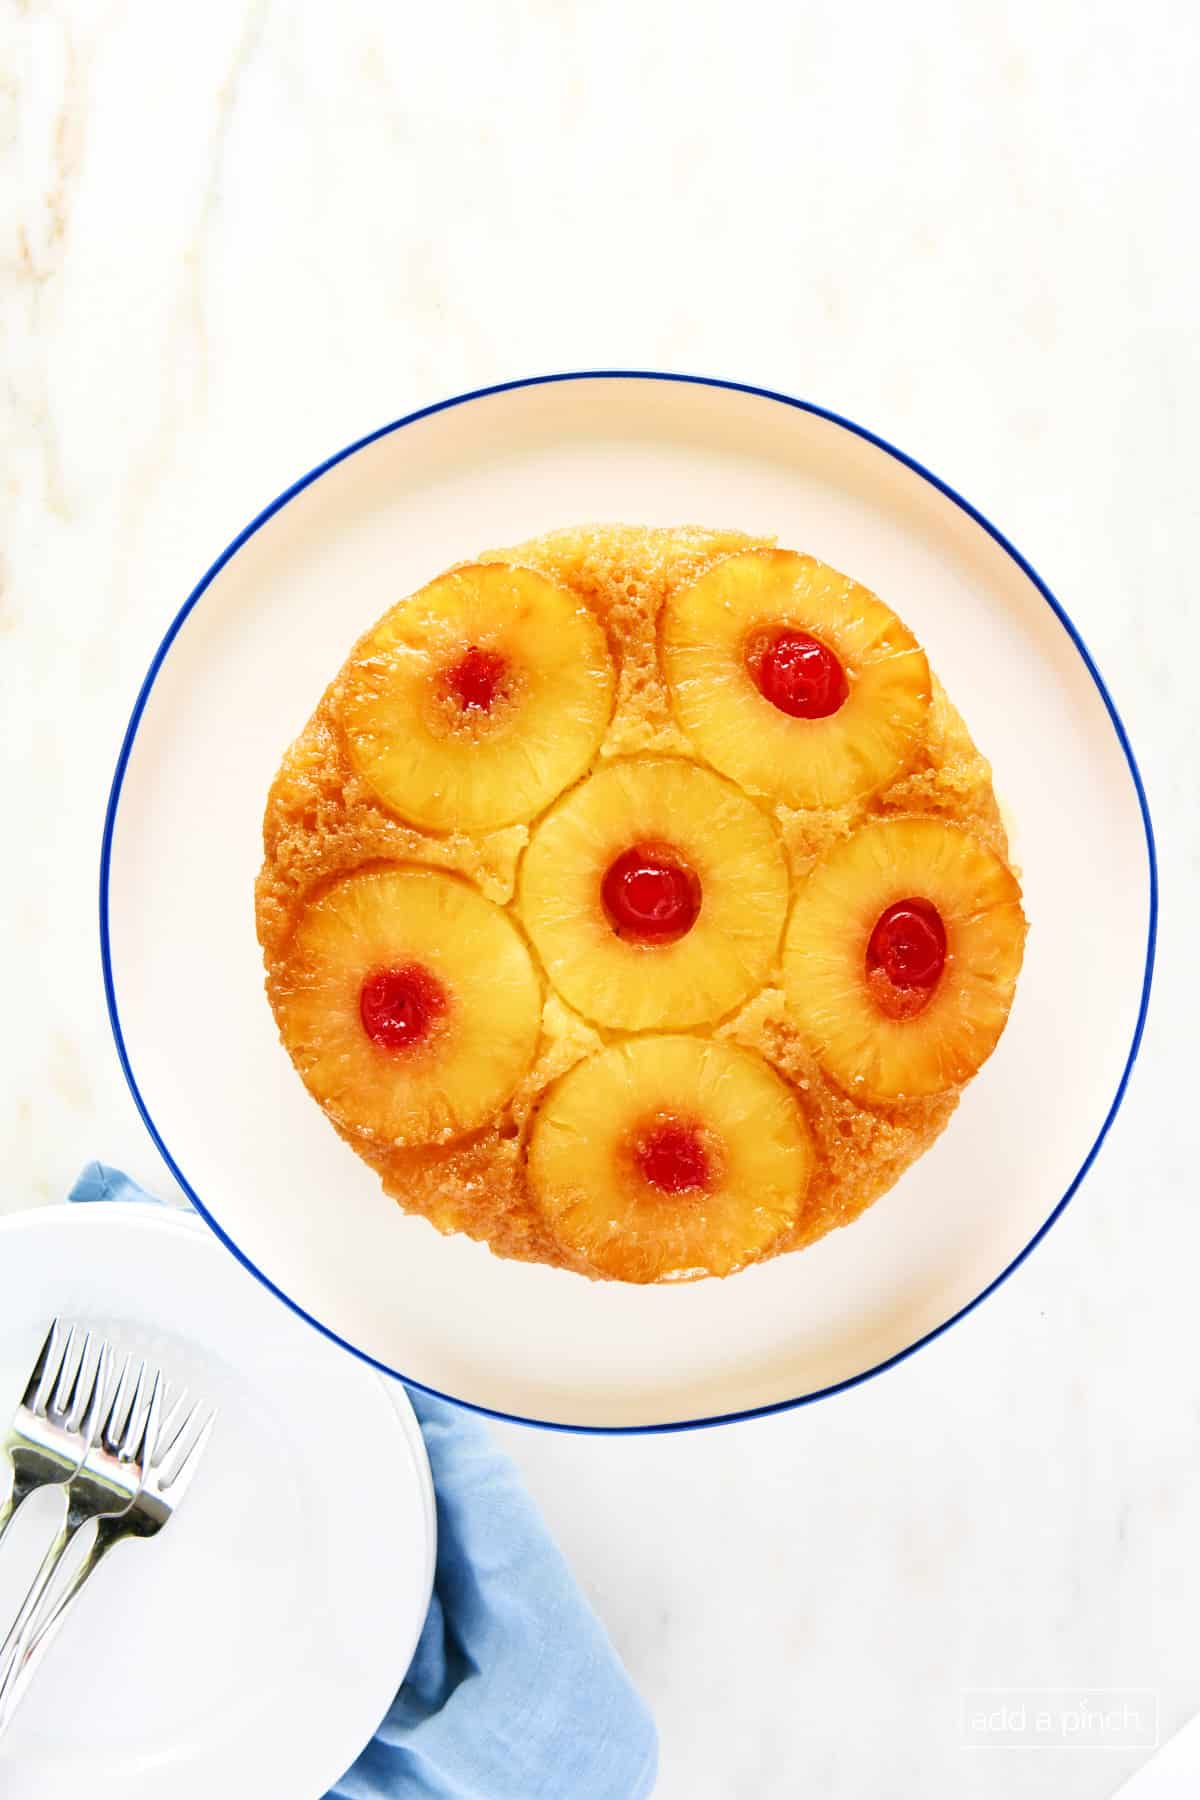 Homemade pineapple upside down cake on a white cake stand with a blue rim on a marble counter with stack of white plates and forks on a blue naplin.